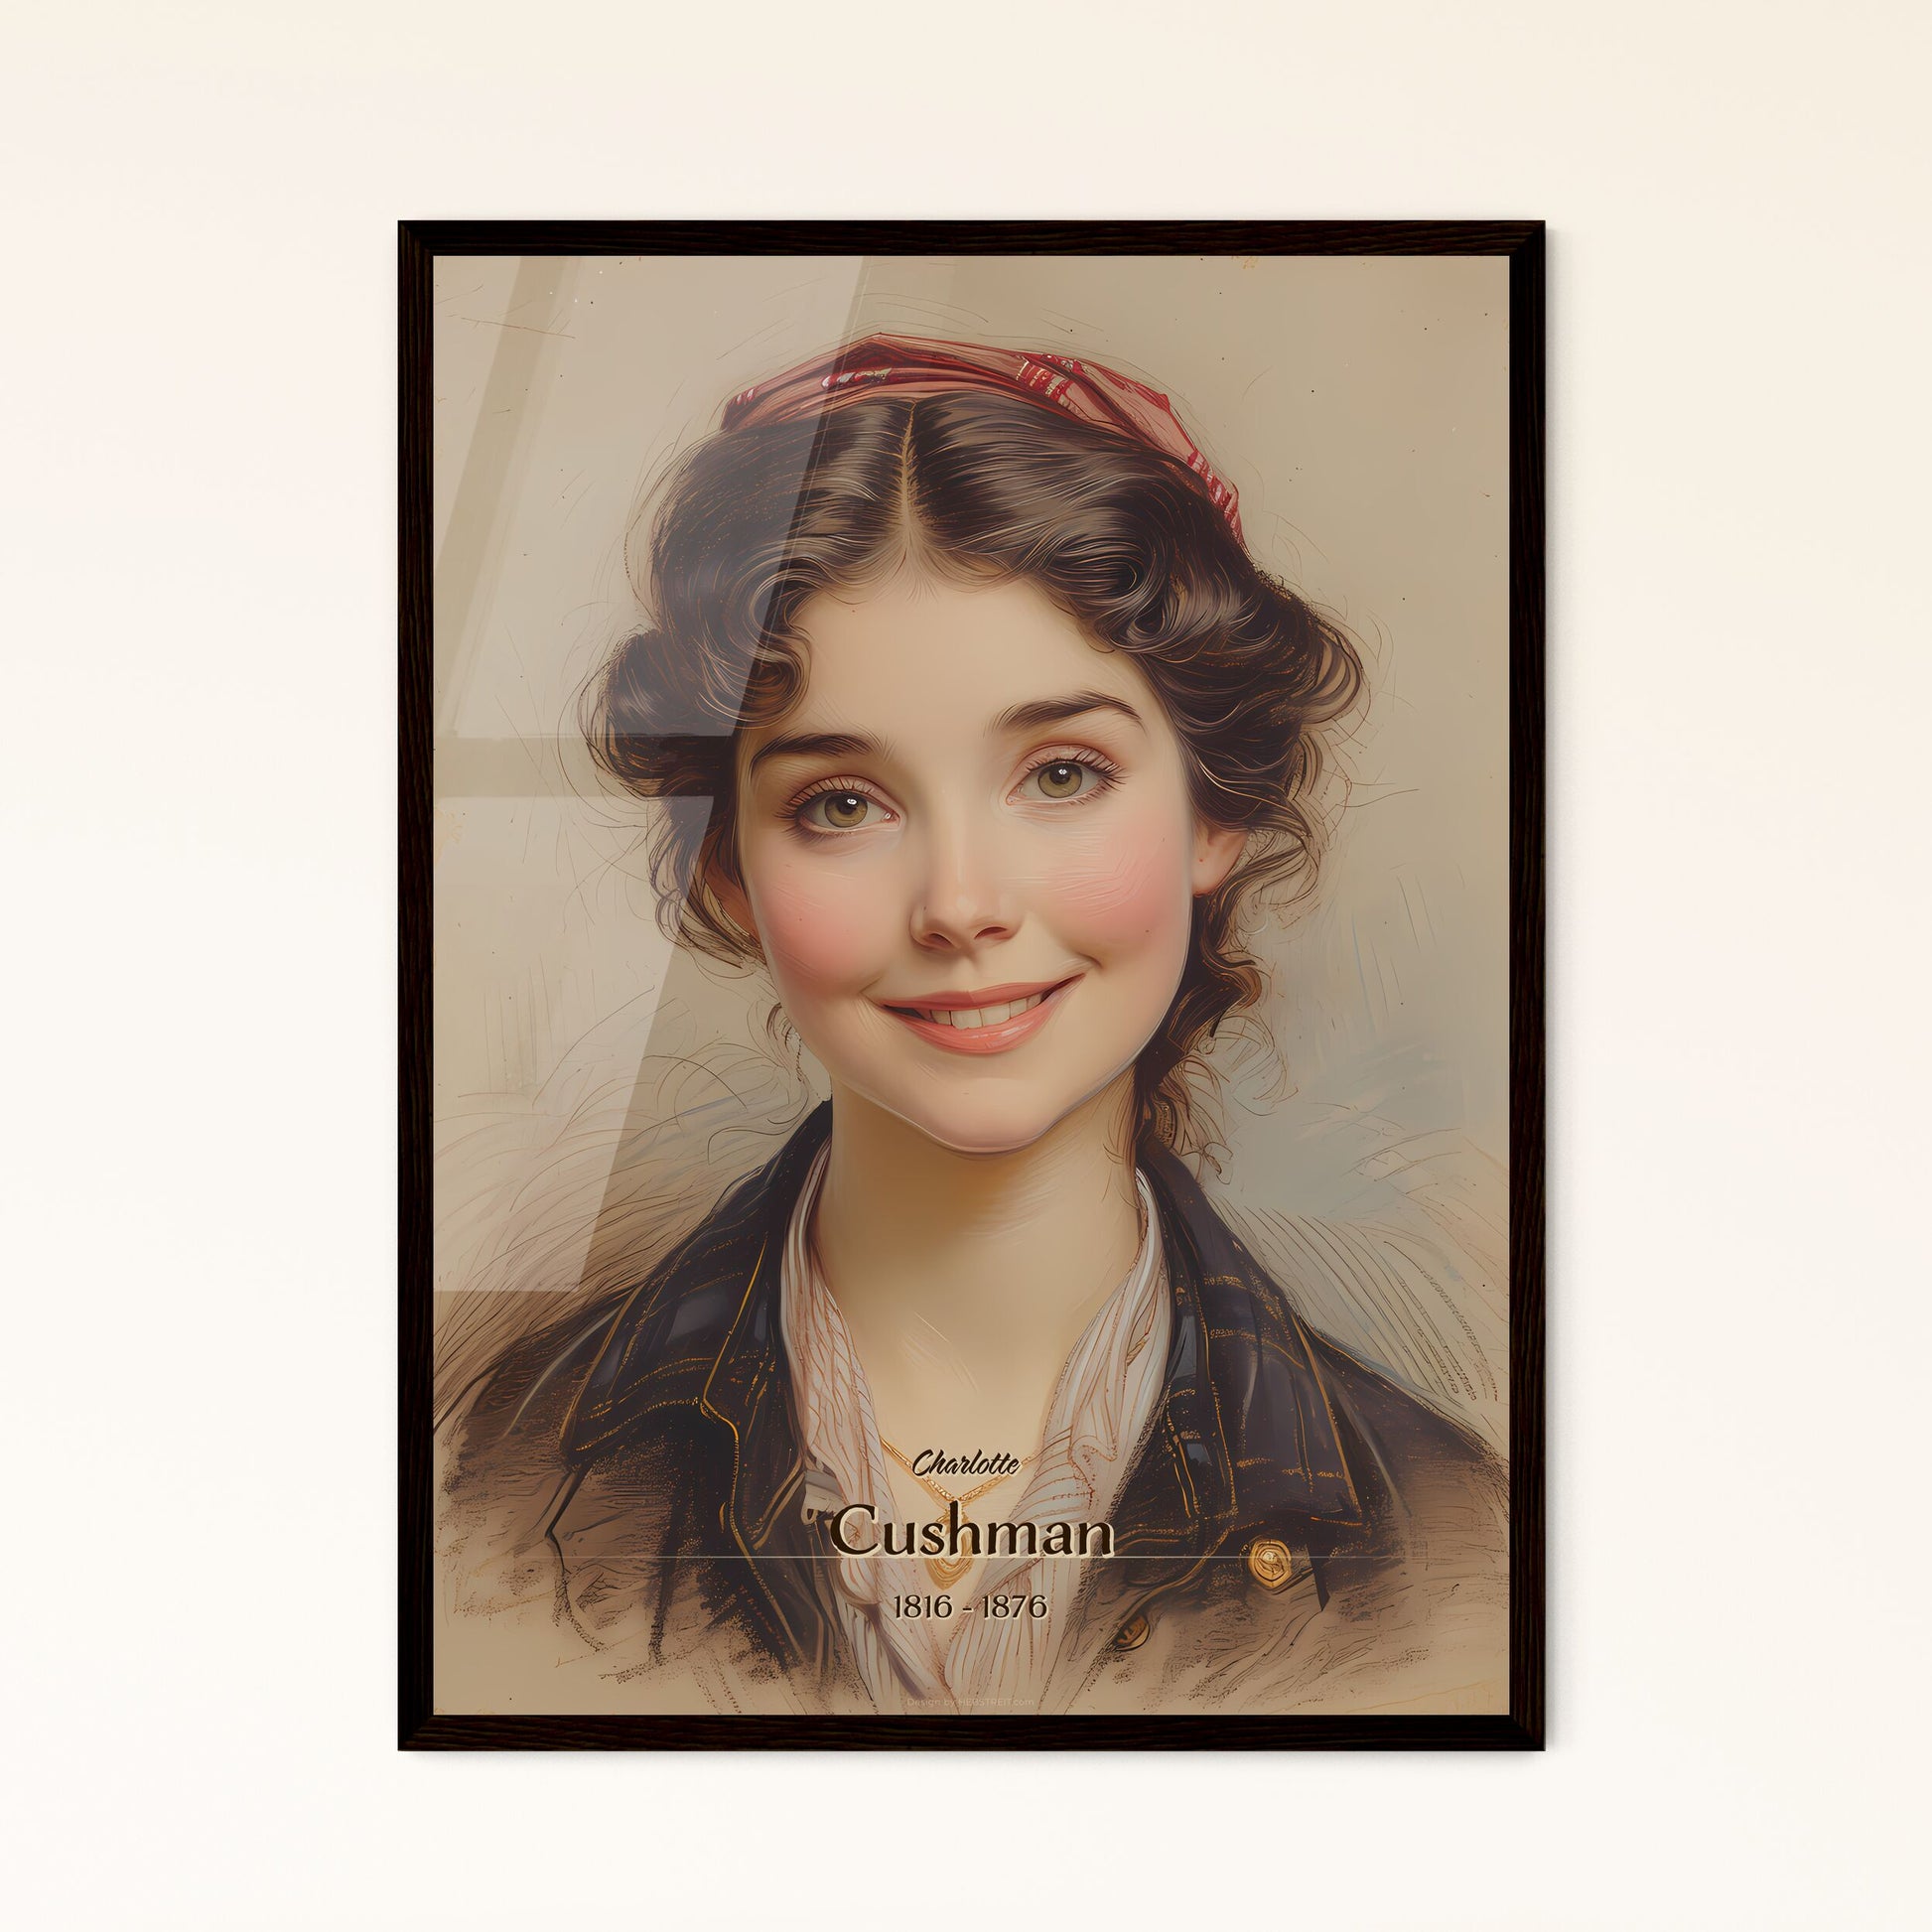 Charlotte, Cushman, 1816 - 1876, A Poster of a woman smiling with a red bow on her head Default Title